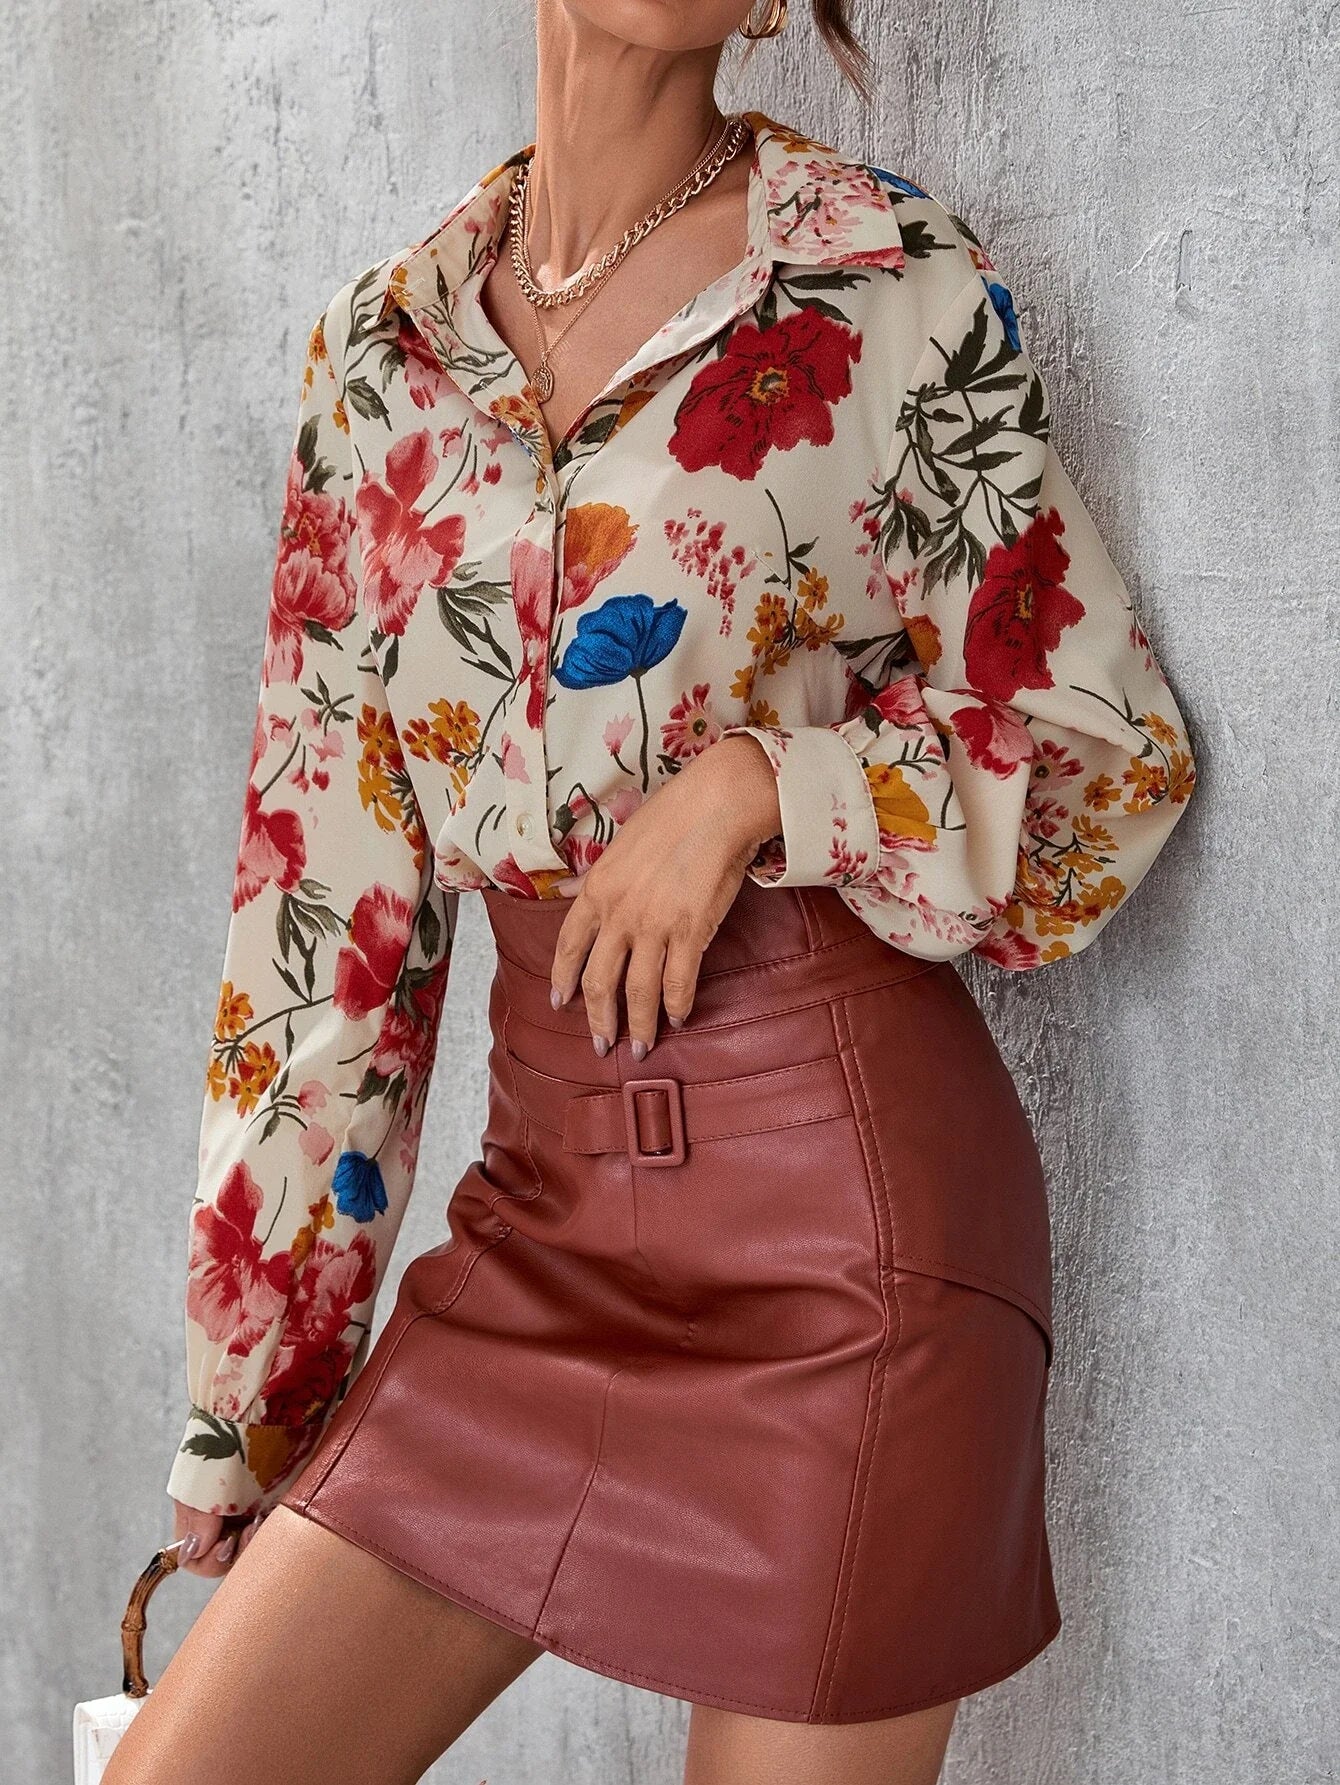 Buy Shein Floral Print Button Front Shirt in Pakistan